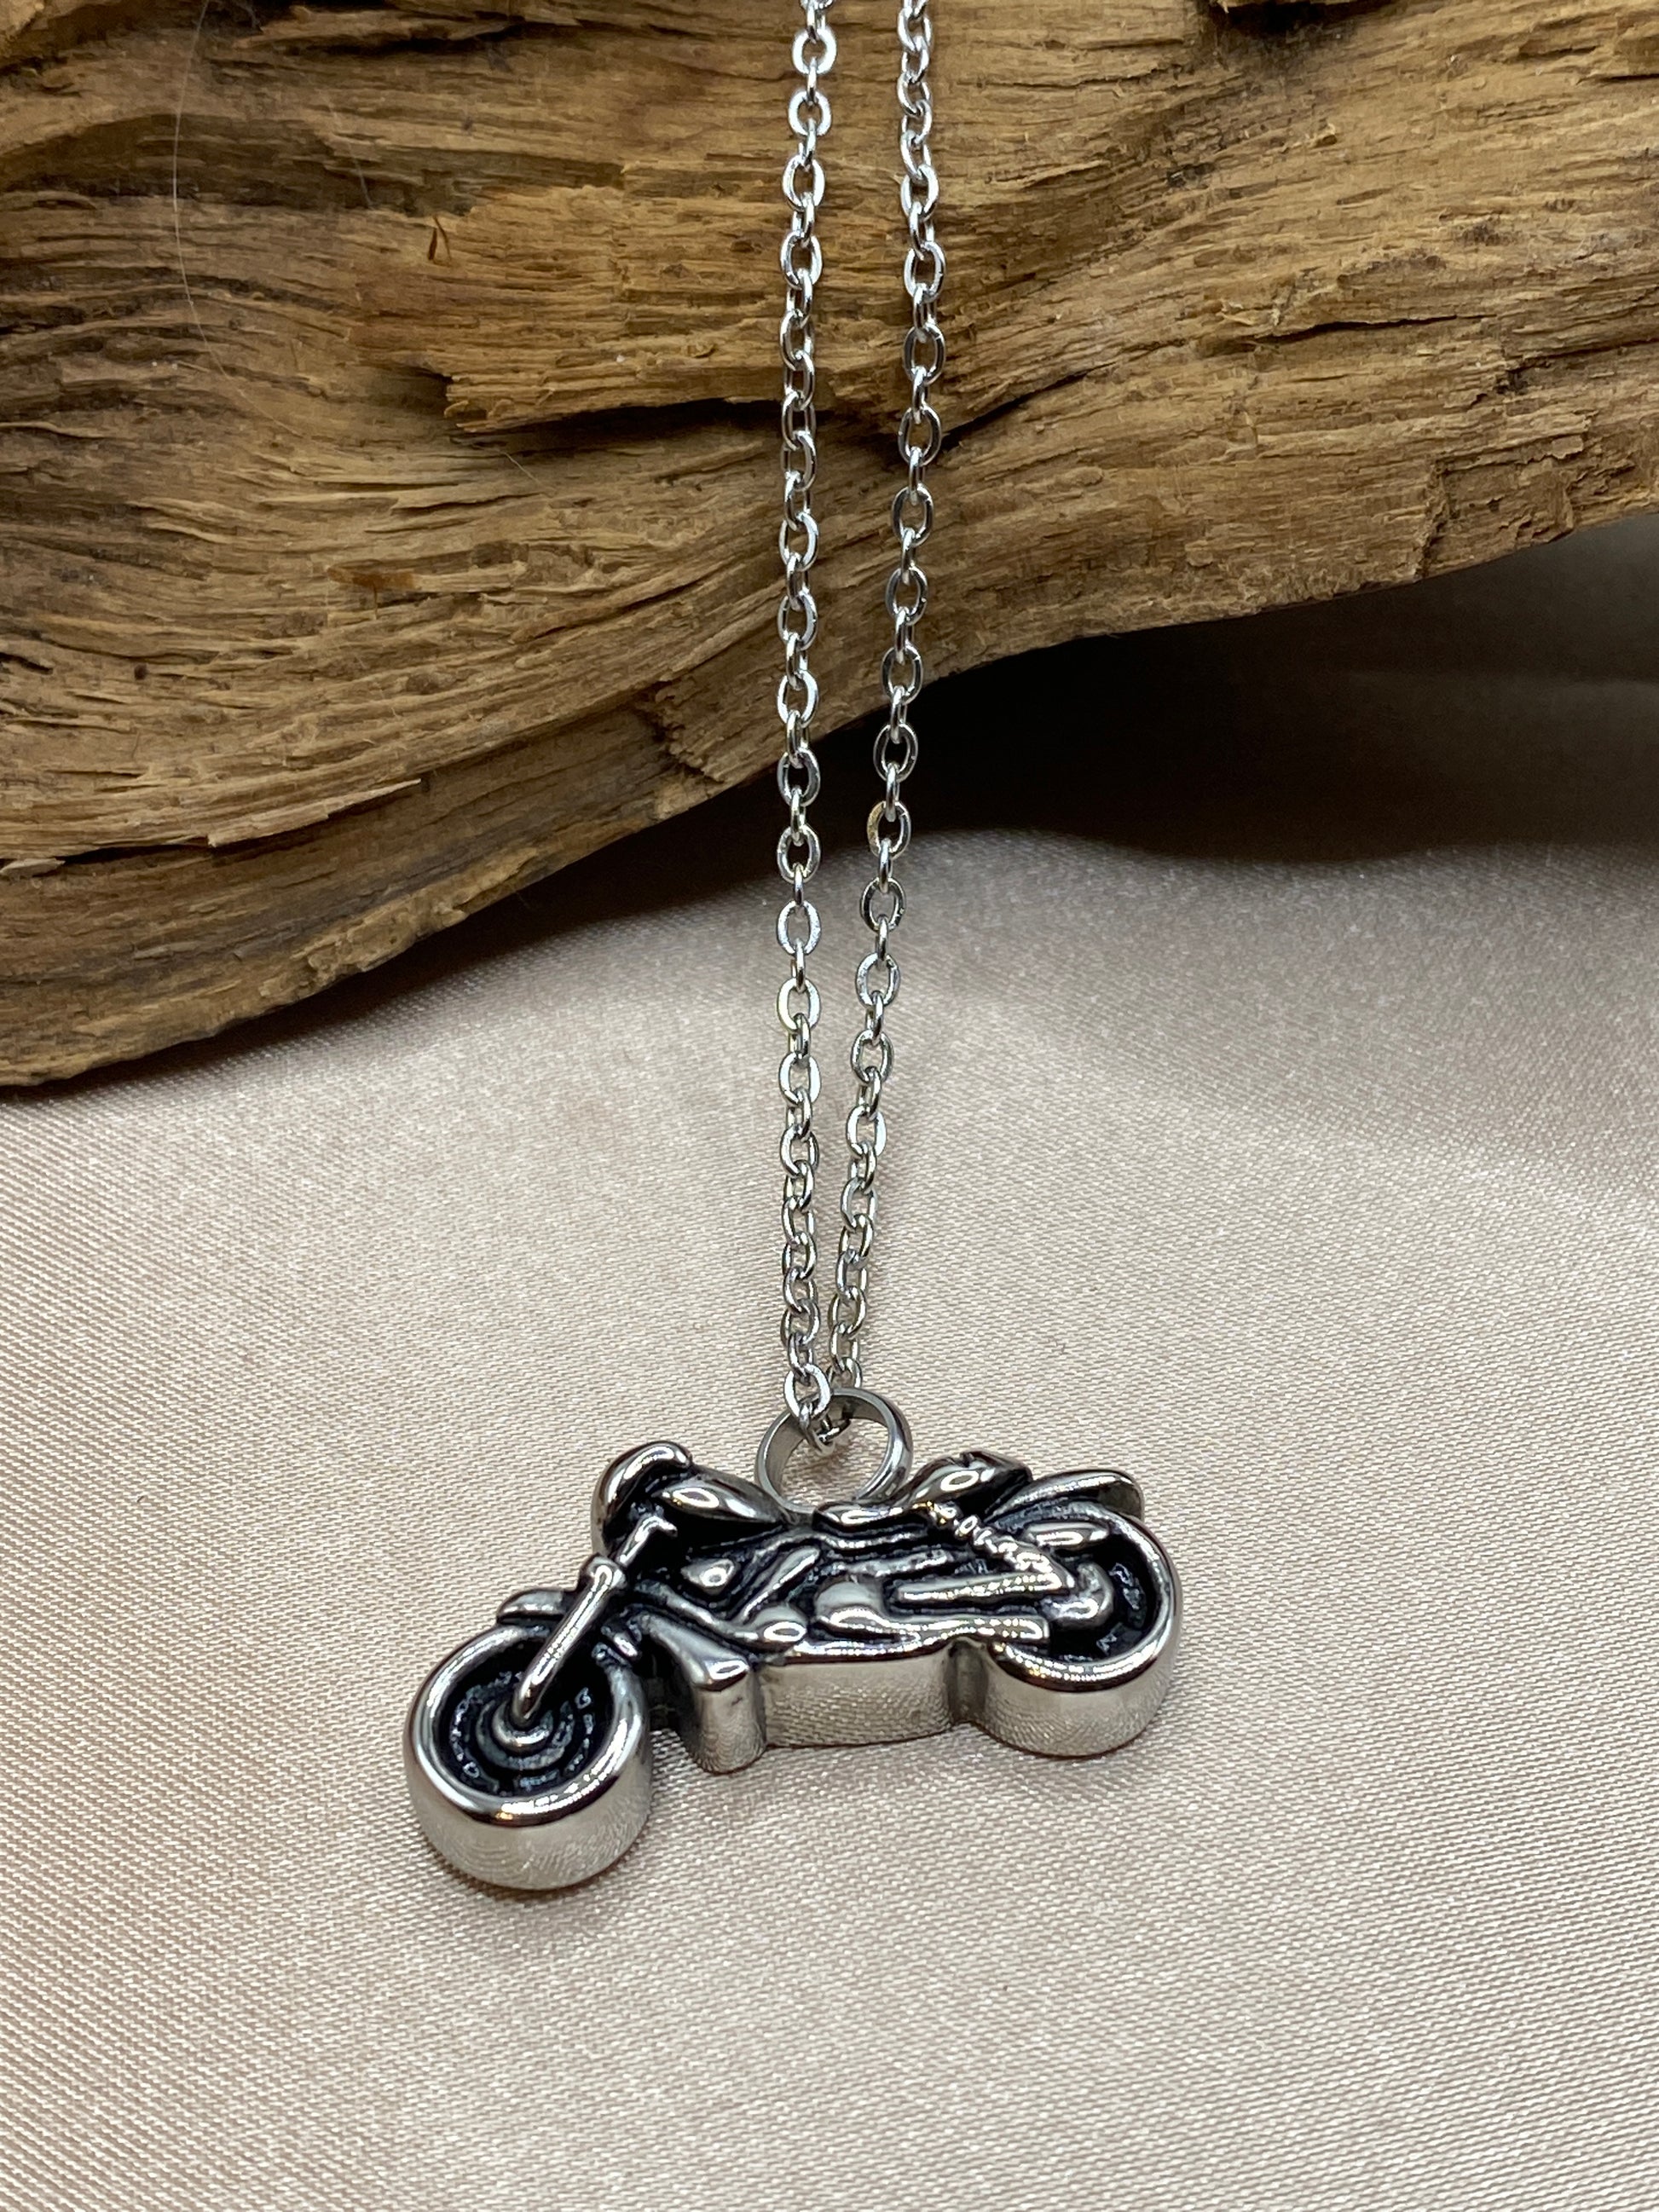 Motorcycle Urn Necklace for Ashes - Biker Ash Necklace - Cremation Urn Jewelry - Motorcycle Rider Memorial Necklace - Loss of Biker Dad